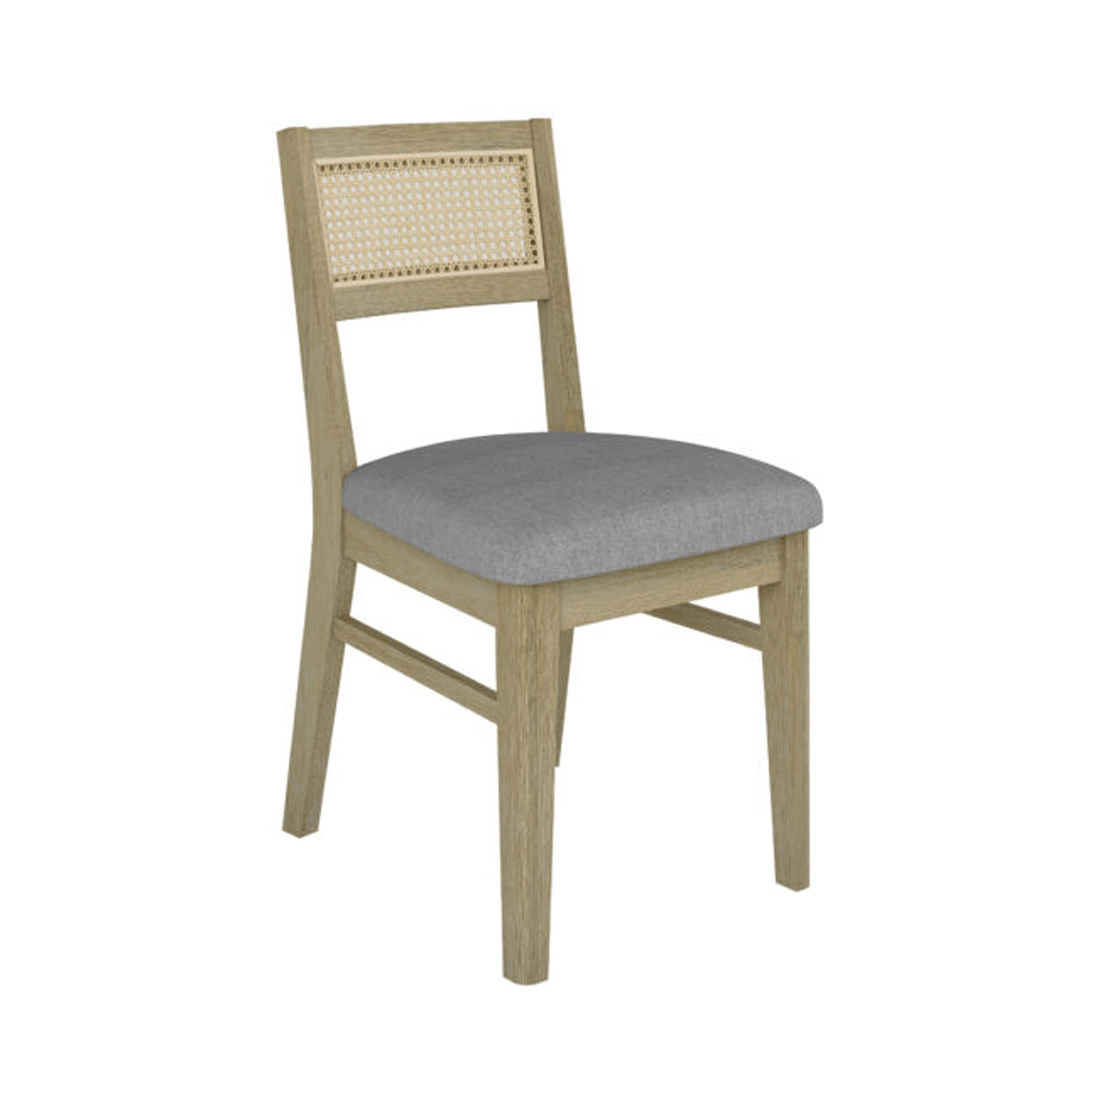 Malmo Timber and Rattan Dining Chair with Grey Fabric Seat